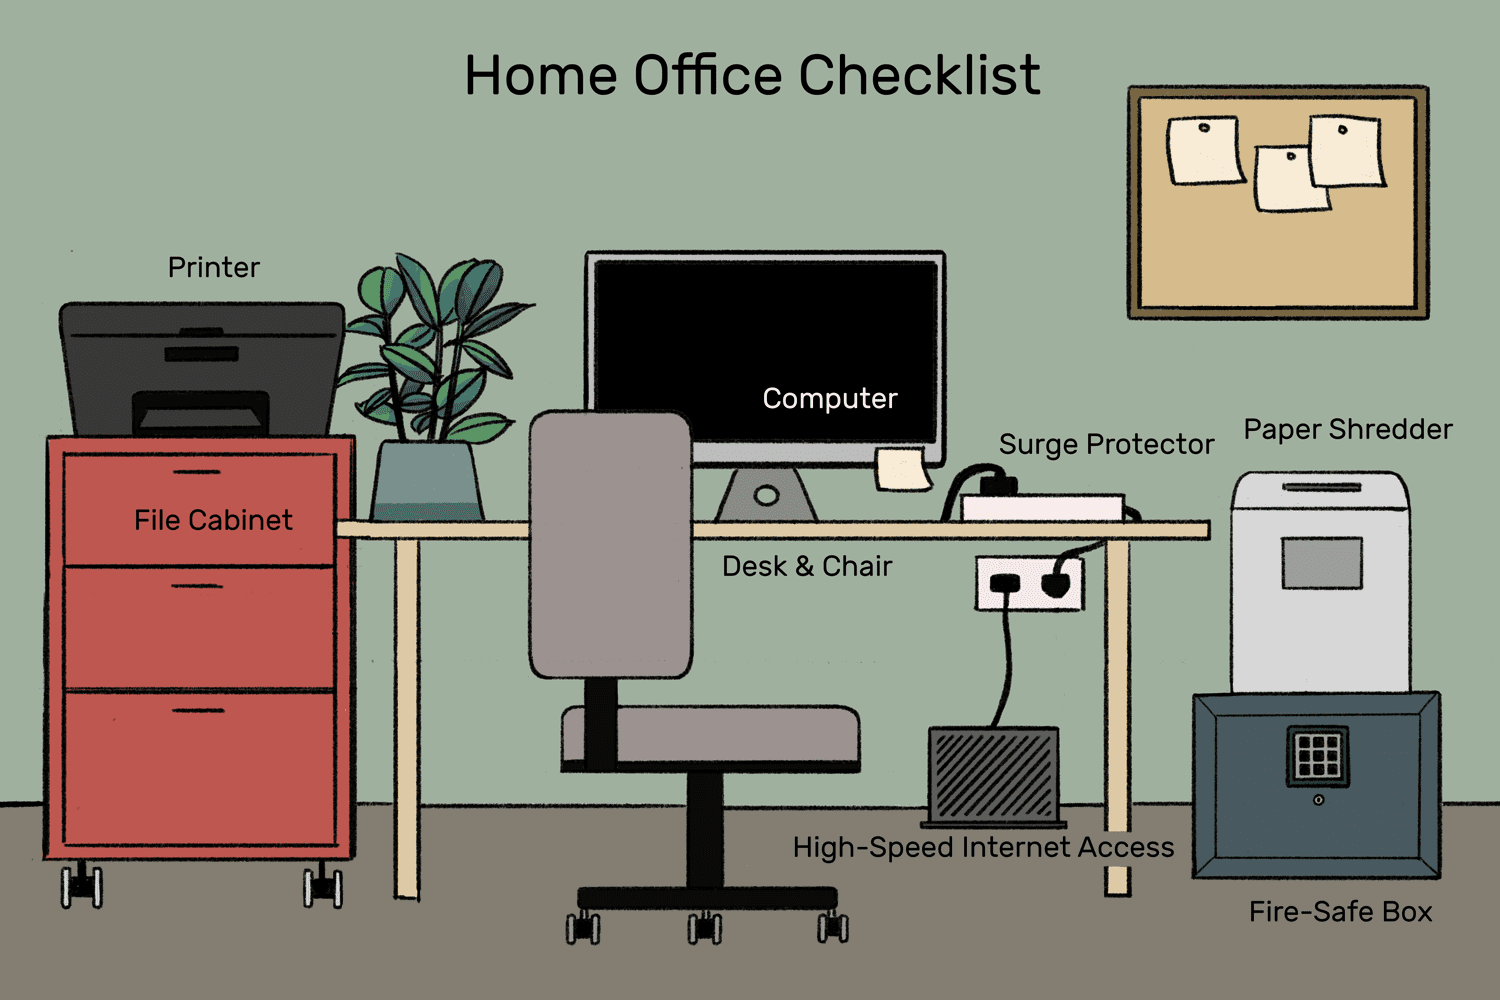 a-checklist-for-setting-up-your-home-office-2951767-final-c6bf30917fa54a40a1491b14f845ece6.png